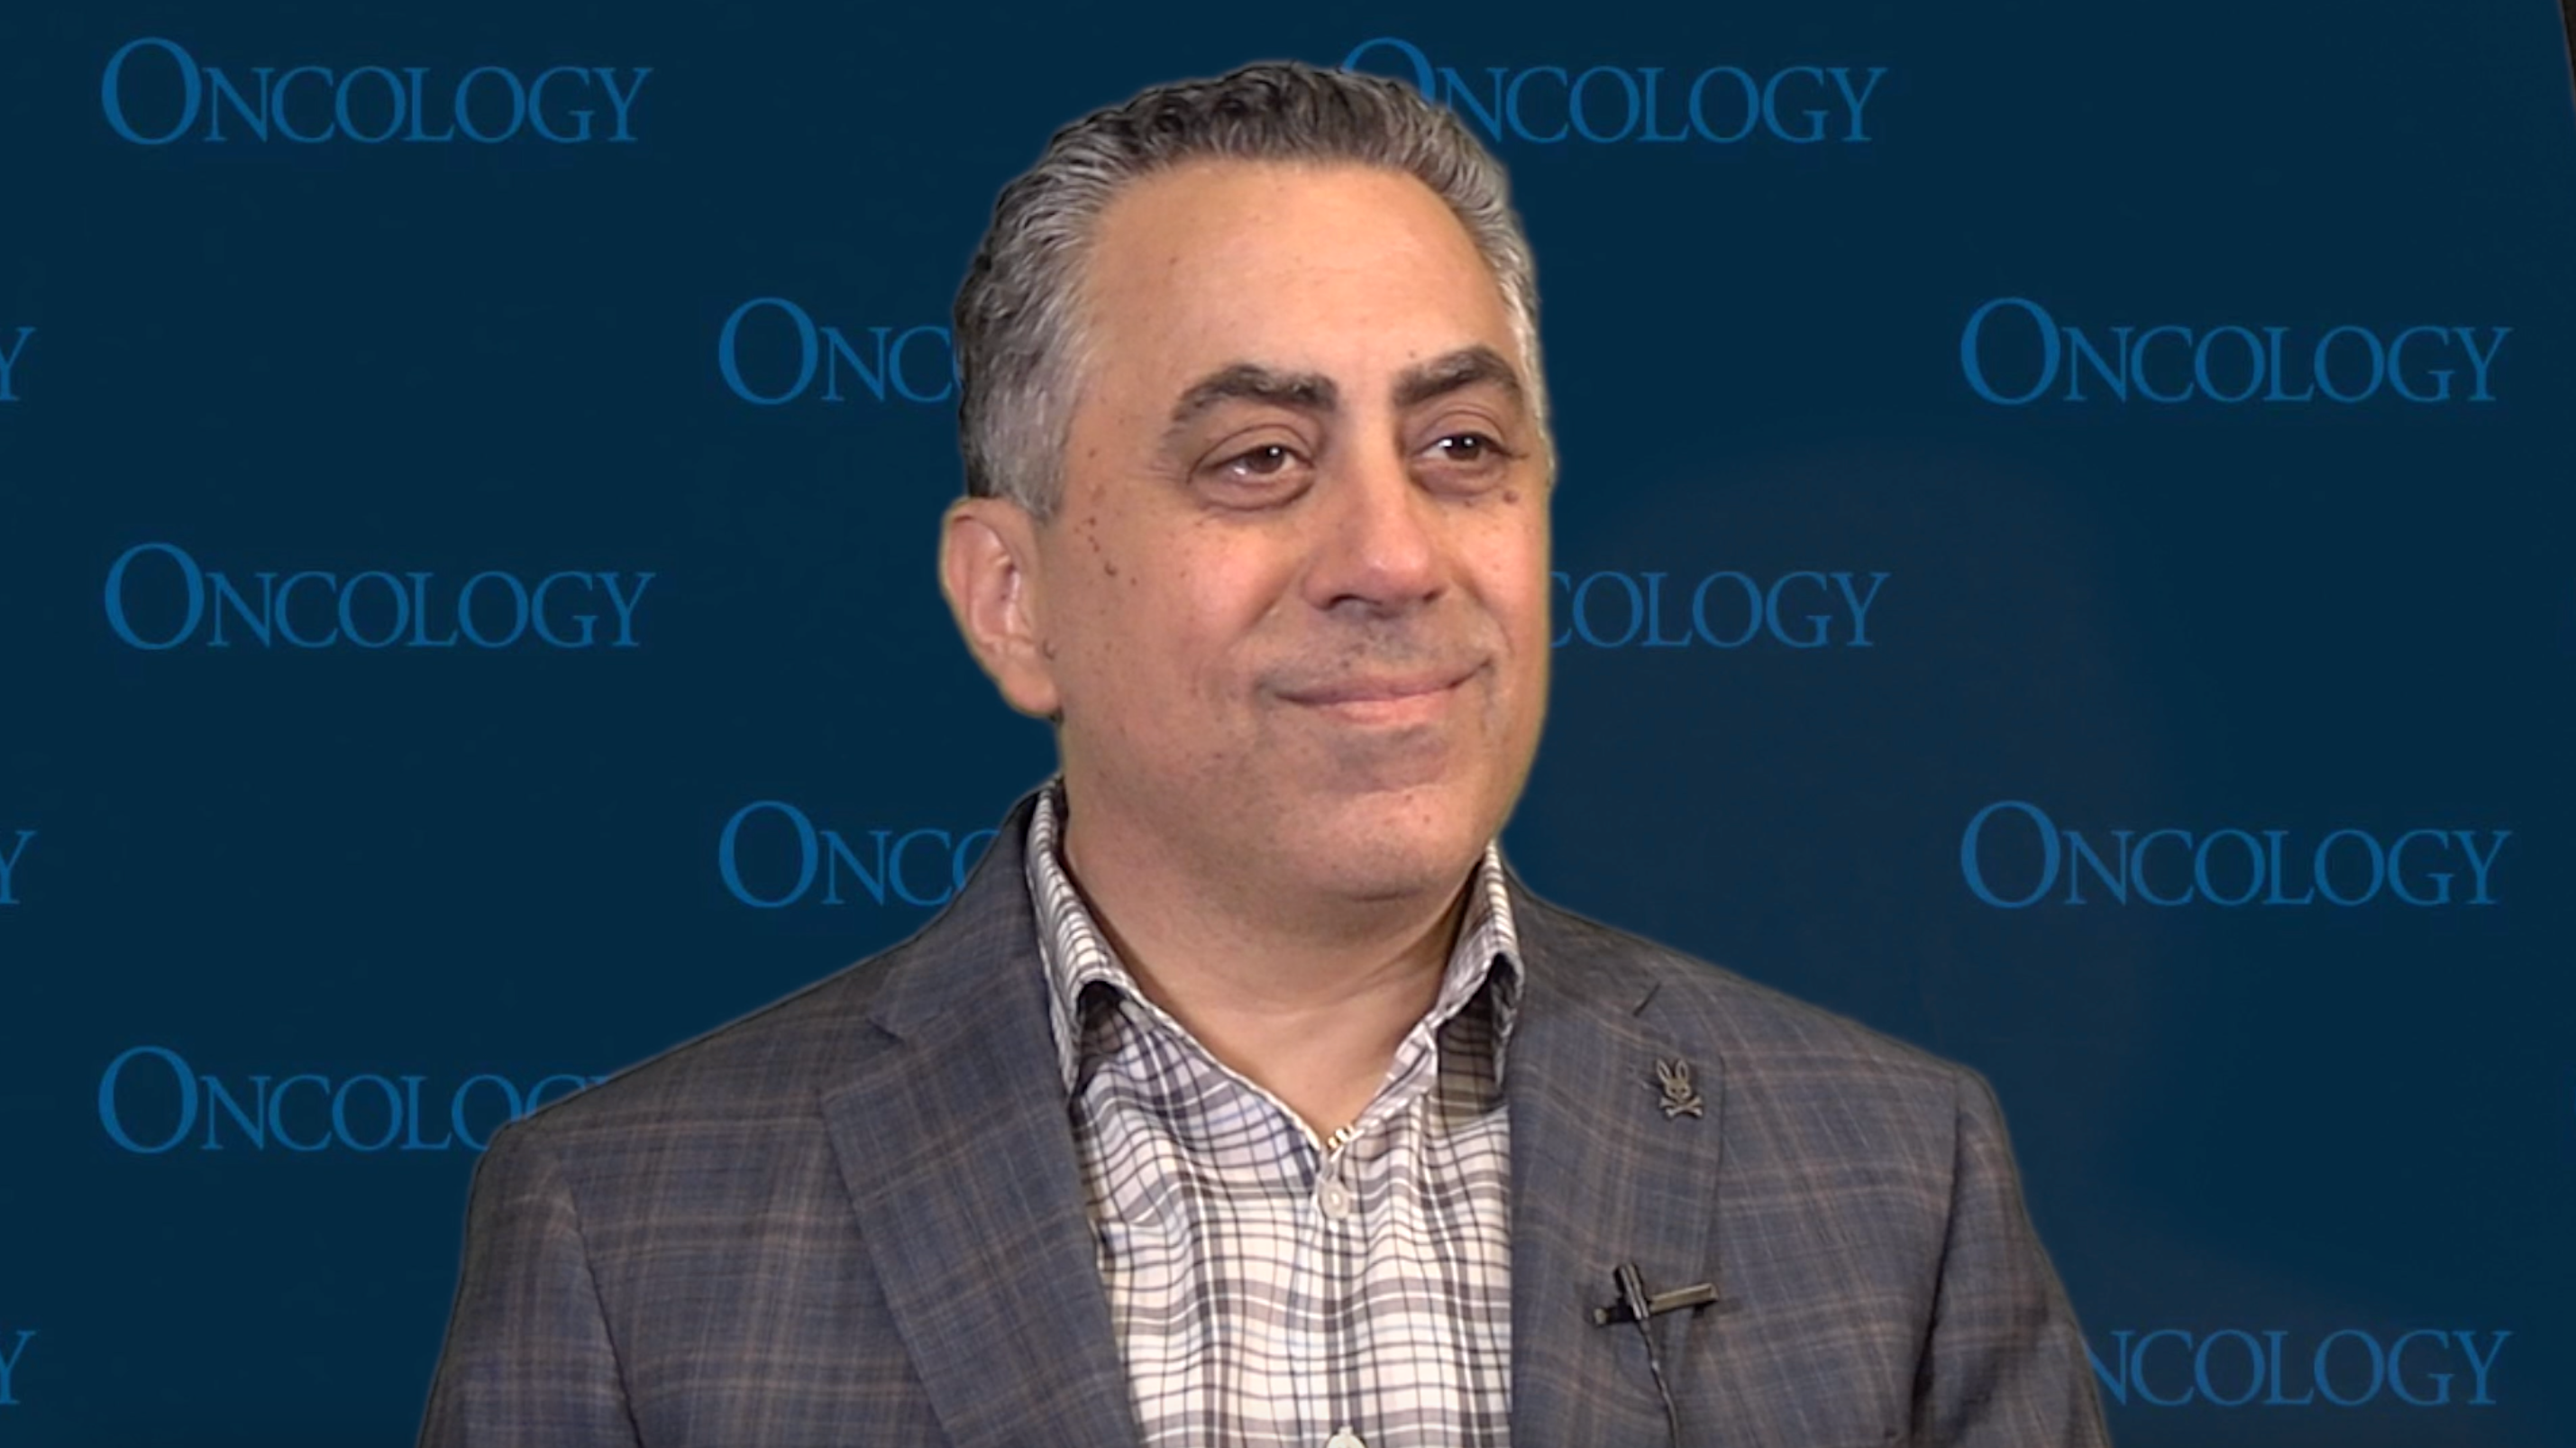 Tanios S. Bekaii-Saab, MD, Reflects on How Targeted Therapy Regimens Will Push Precision Approaches in CRC